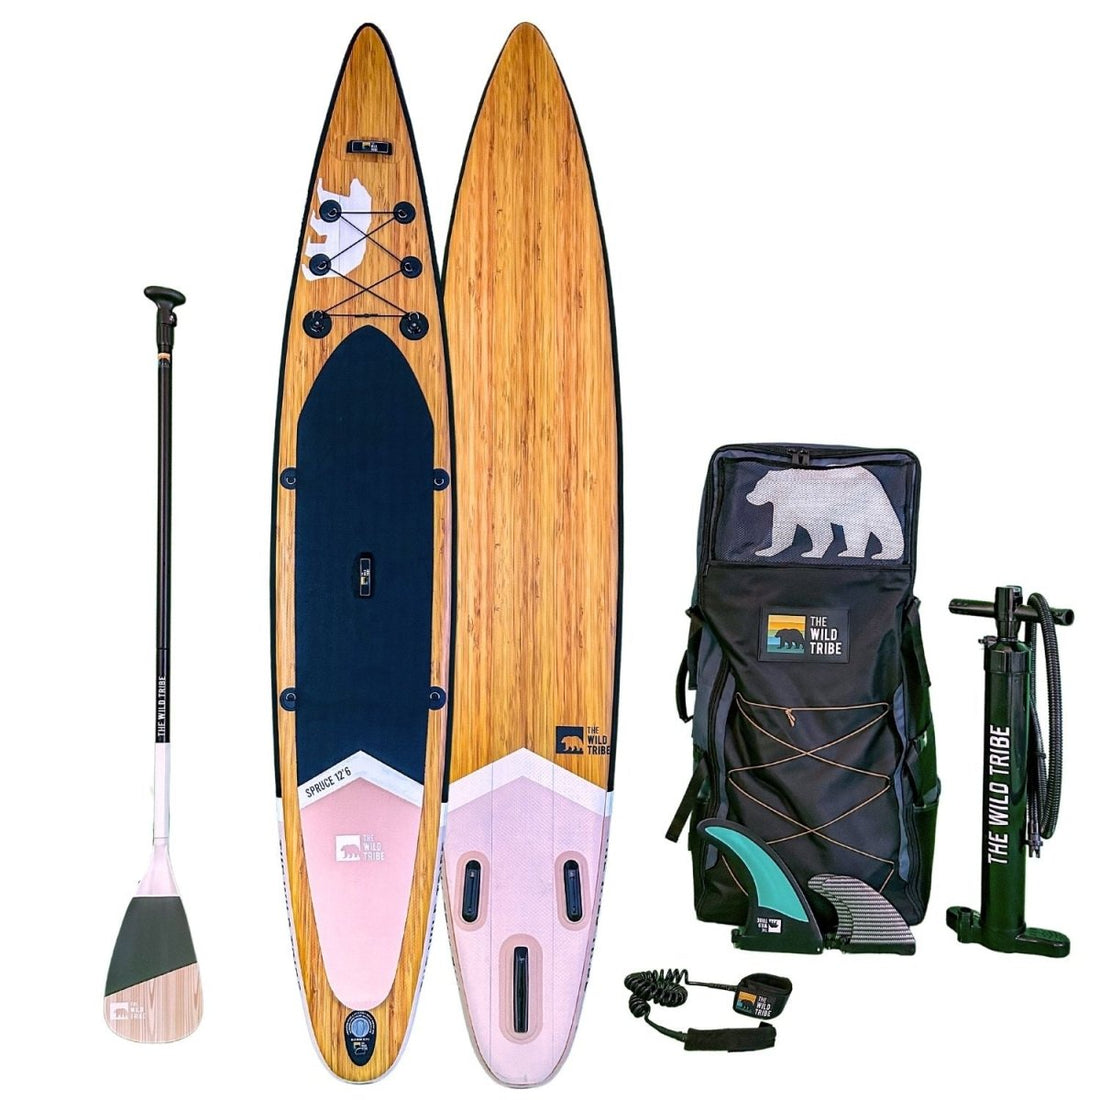 Spruce 12'6 Salmon: Racing 12'6" Premium Inflatable Paddleboard - The Wild Tribe